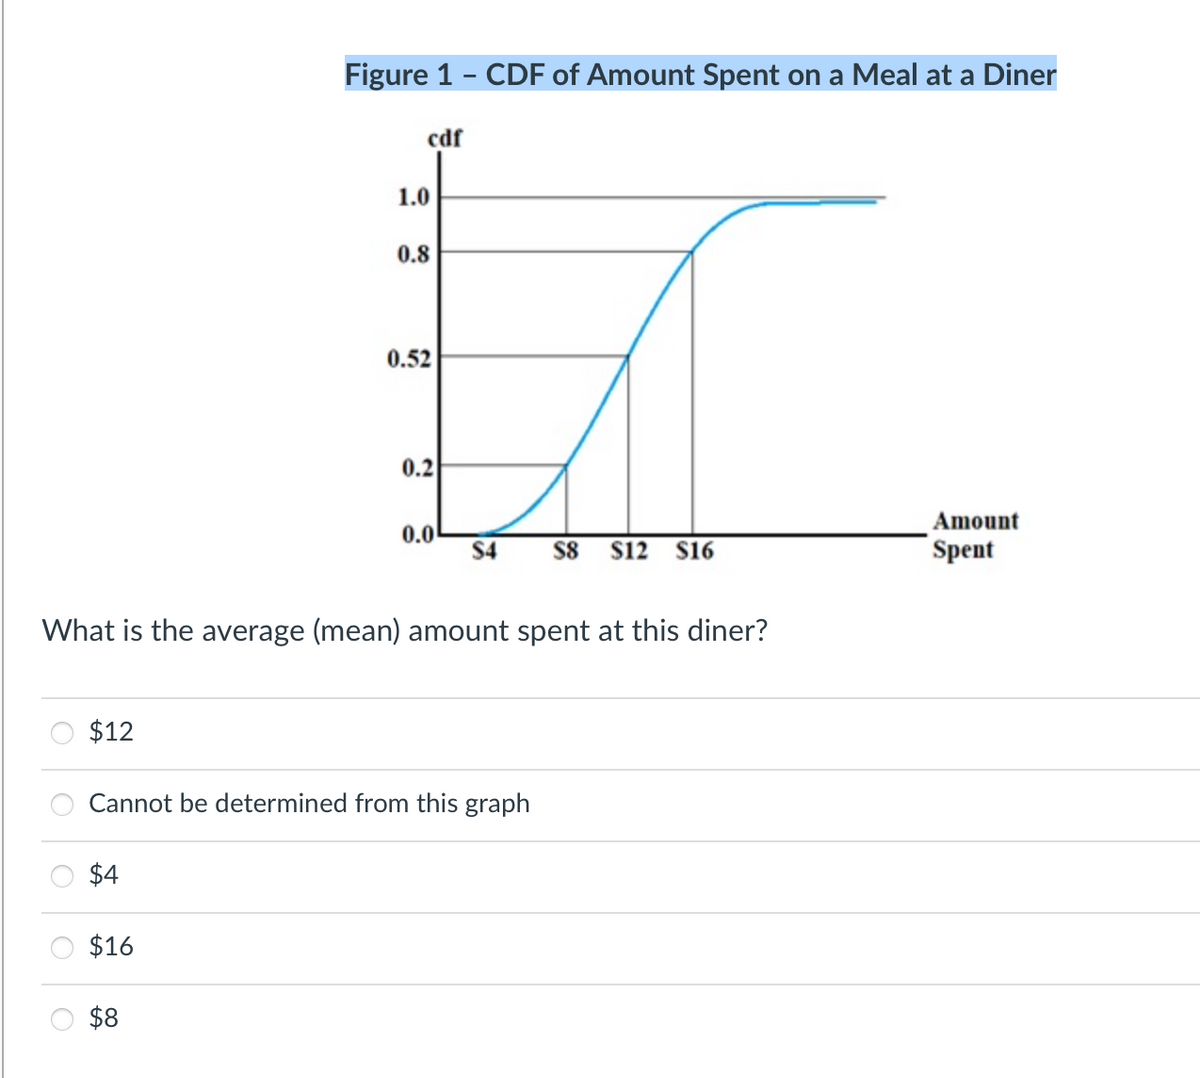 $12
Figure 1 - CDF of Amount Spent on a Meal at a Diner
$16
cdf
$8
1.0
0.8
0.52
0.2
What is the average (mean) amount spent at this diner?
0.0
$4 $8 $12 $16
Cannot be determined from this graph
$4
Amount
Spent